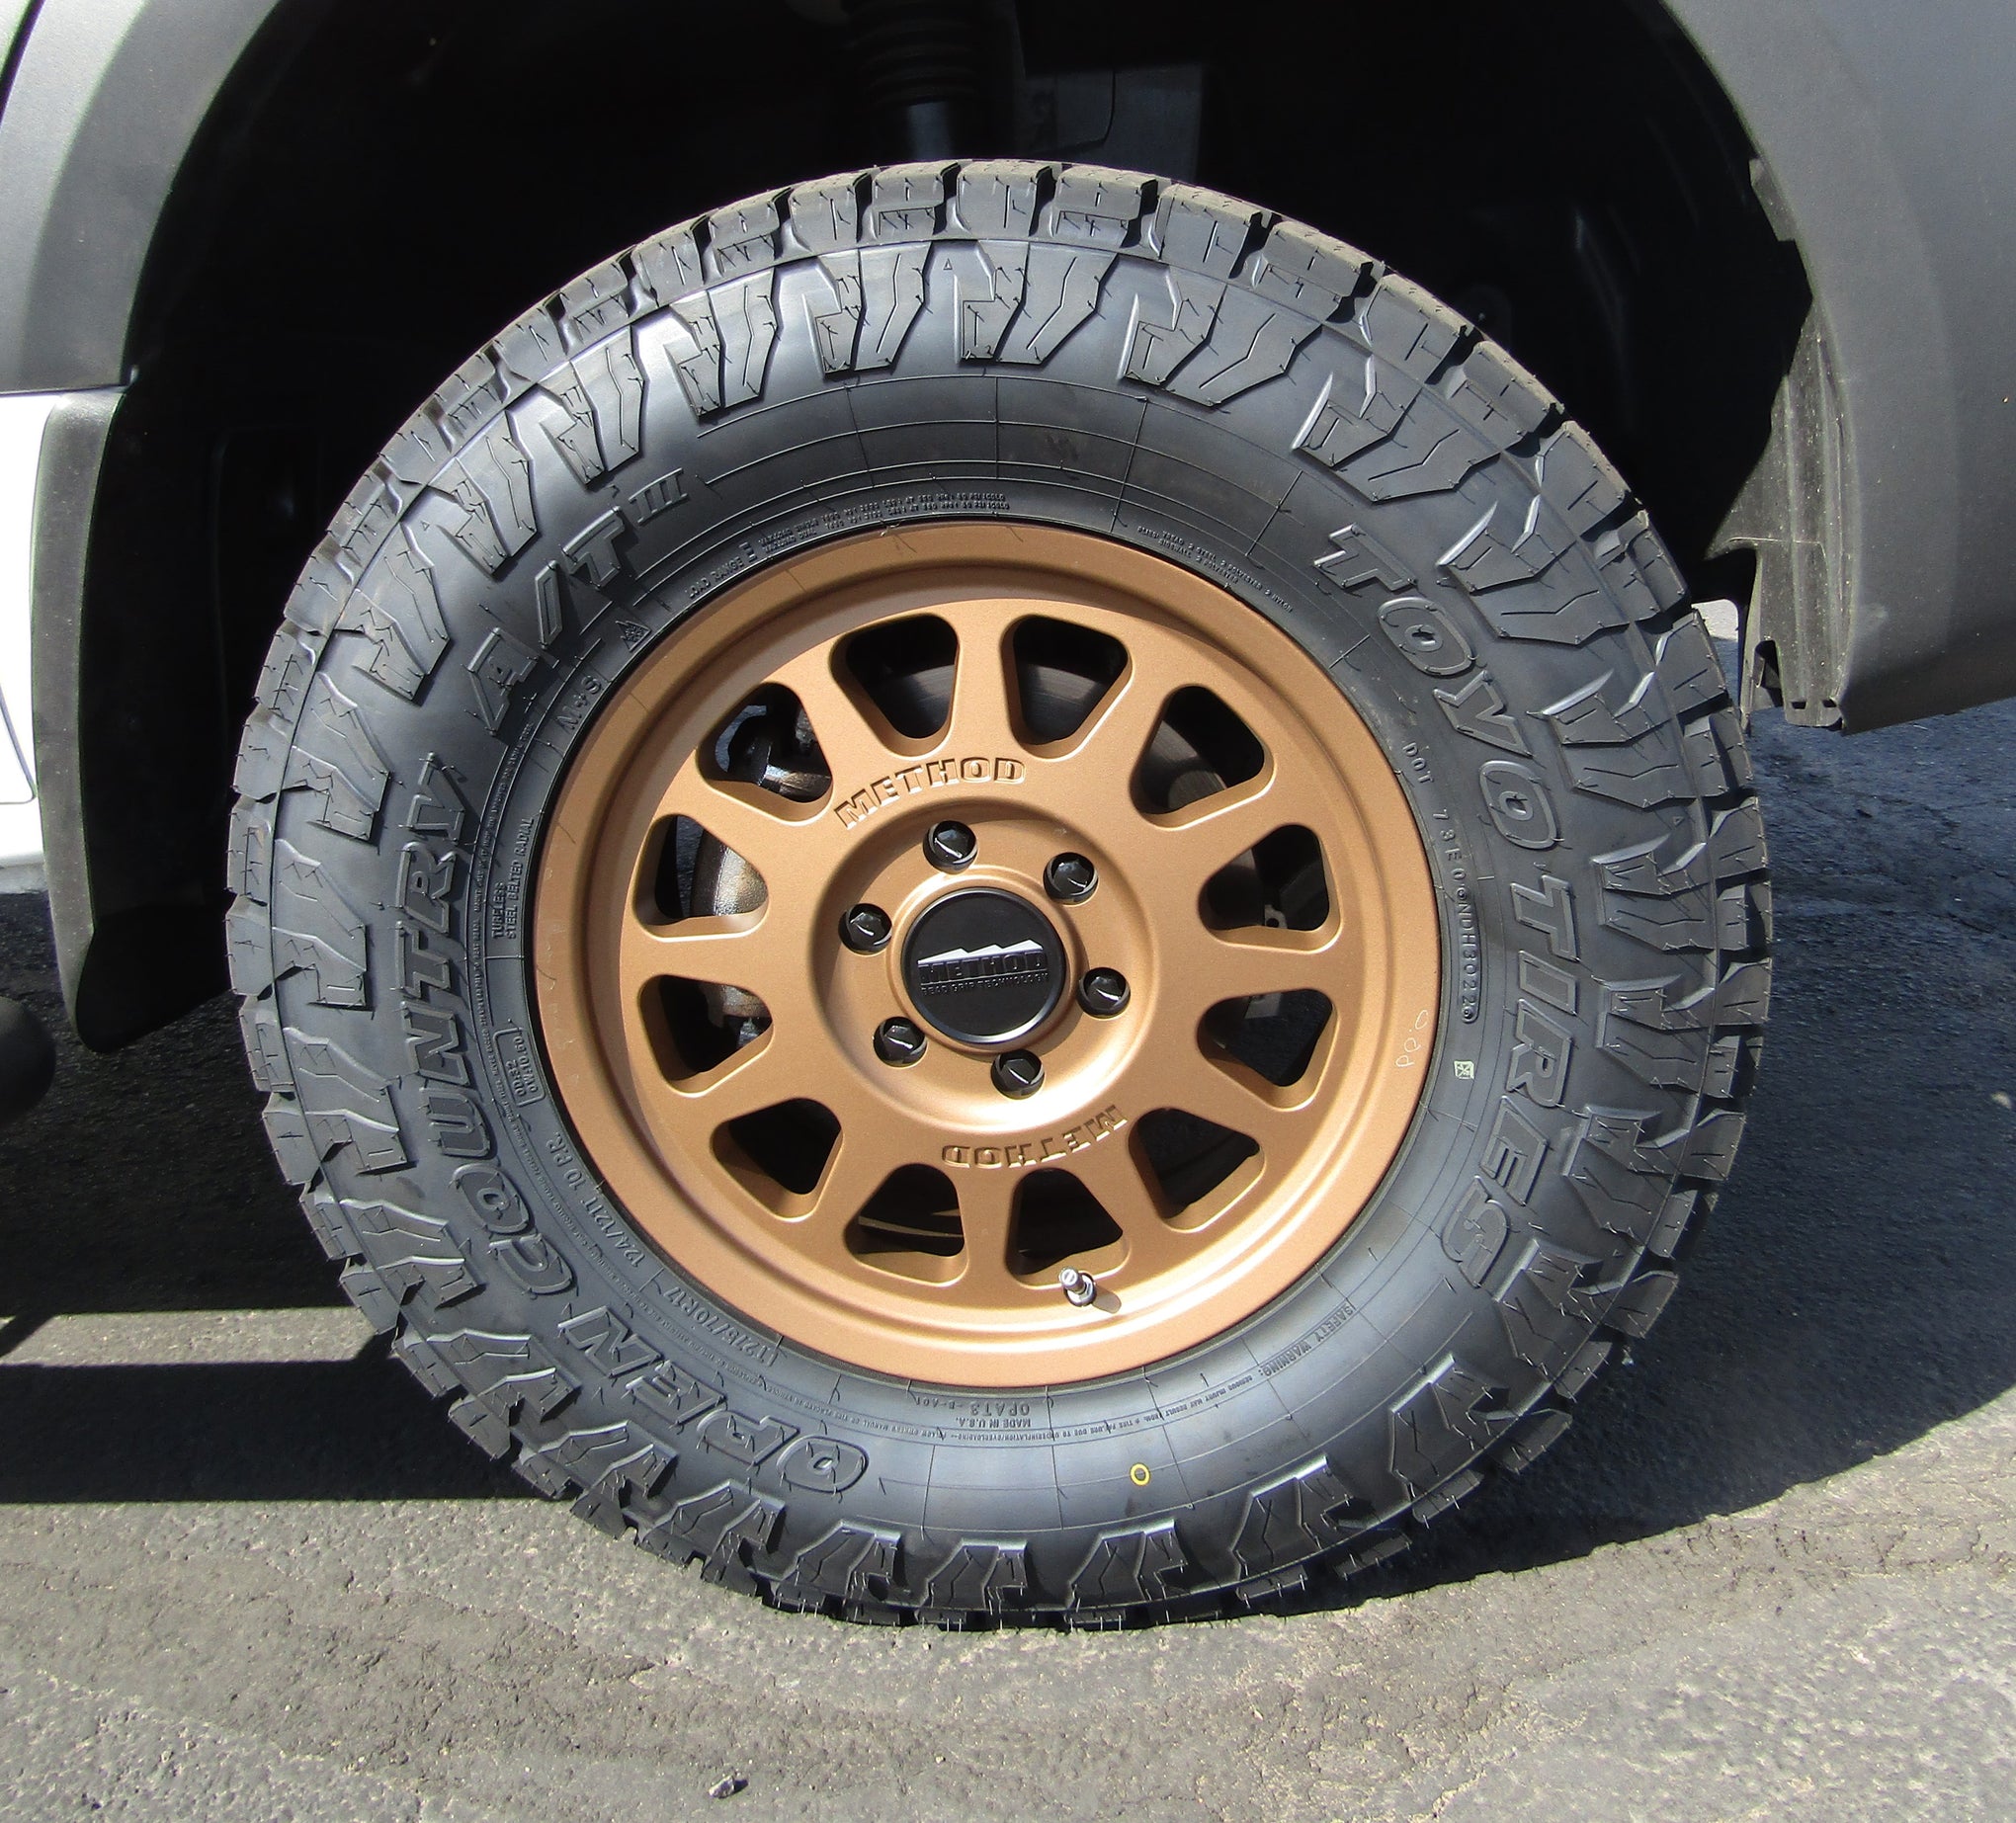 Toyo Open Country All Terrain Tire AT III 275 / 70R17